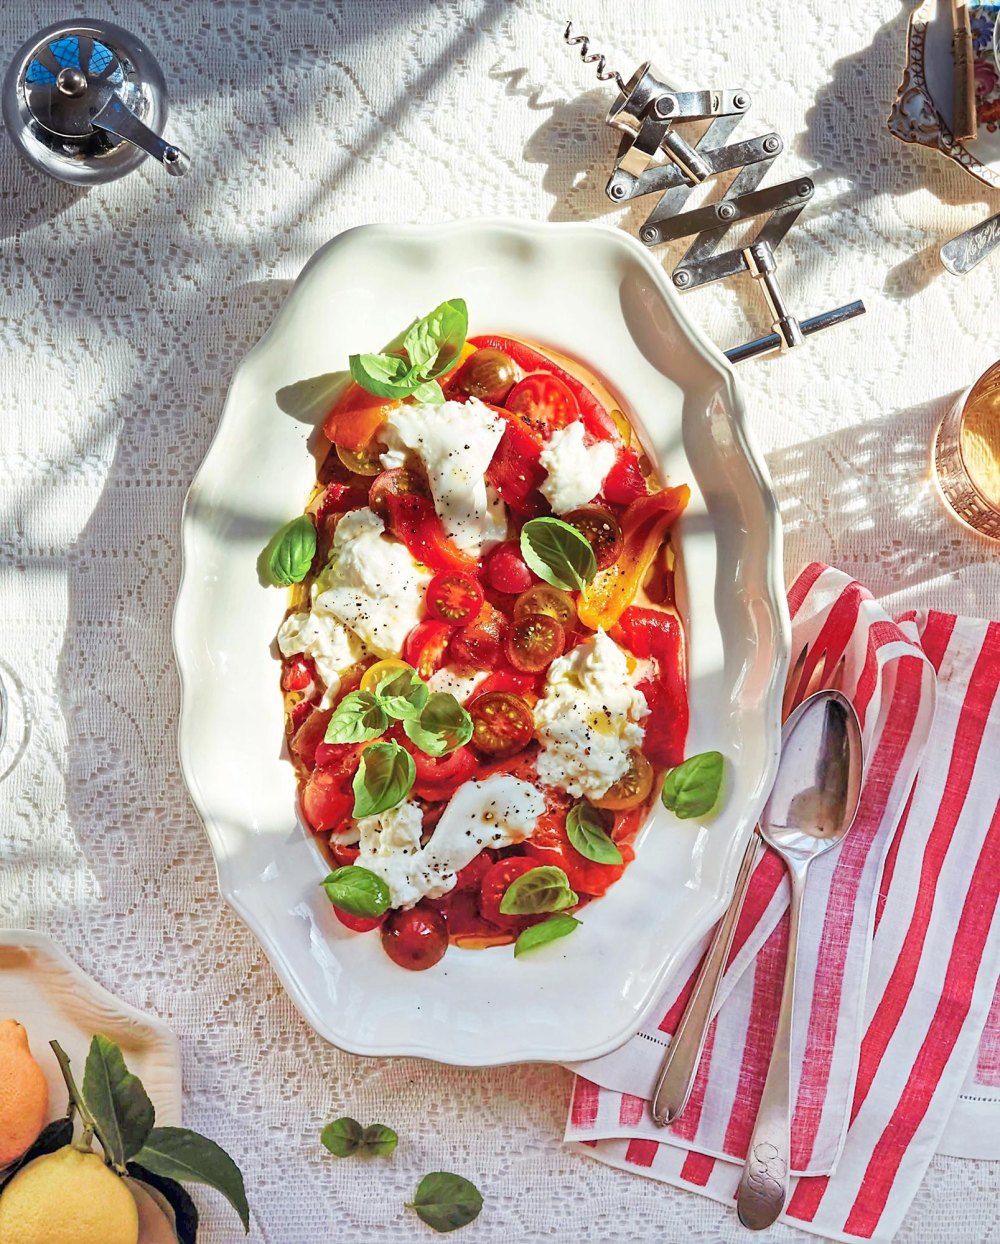 Benny Blanco Shares His Crowd-Pleasing Caprese Salad Recipe From His New Cookbook